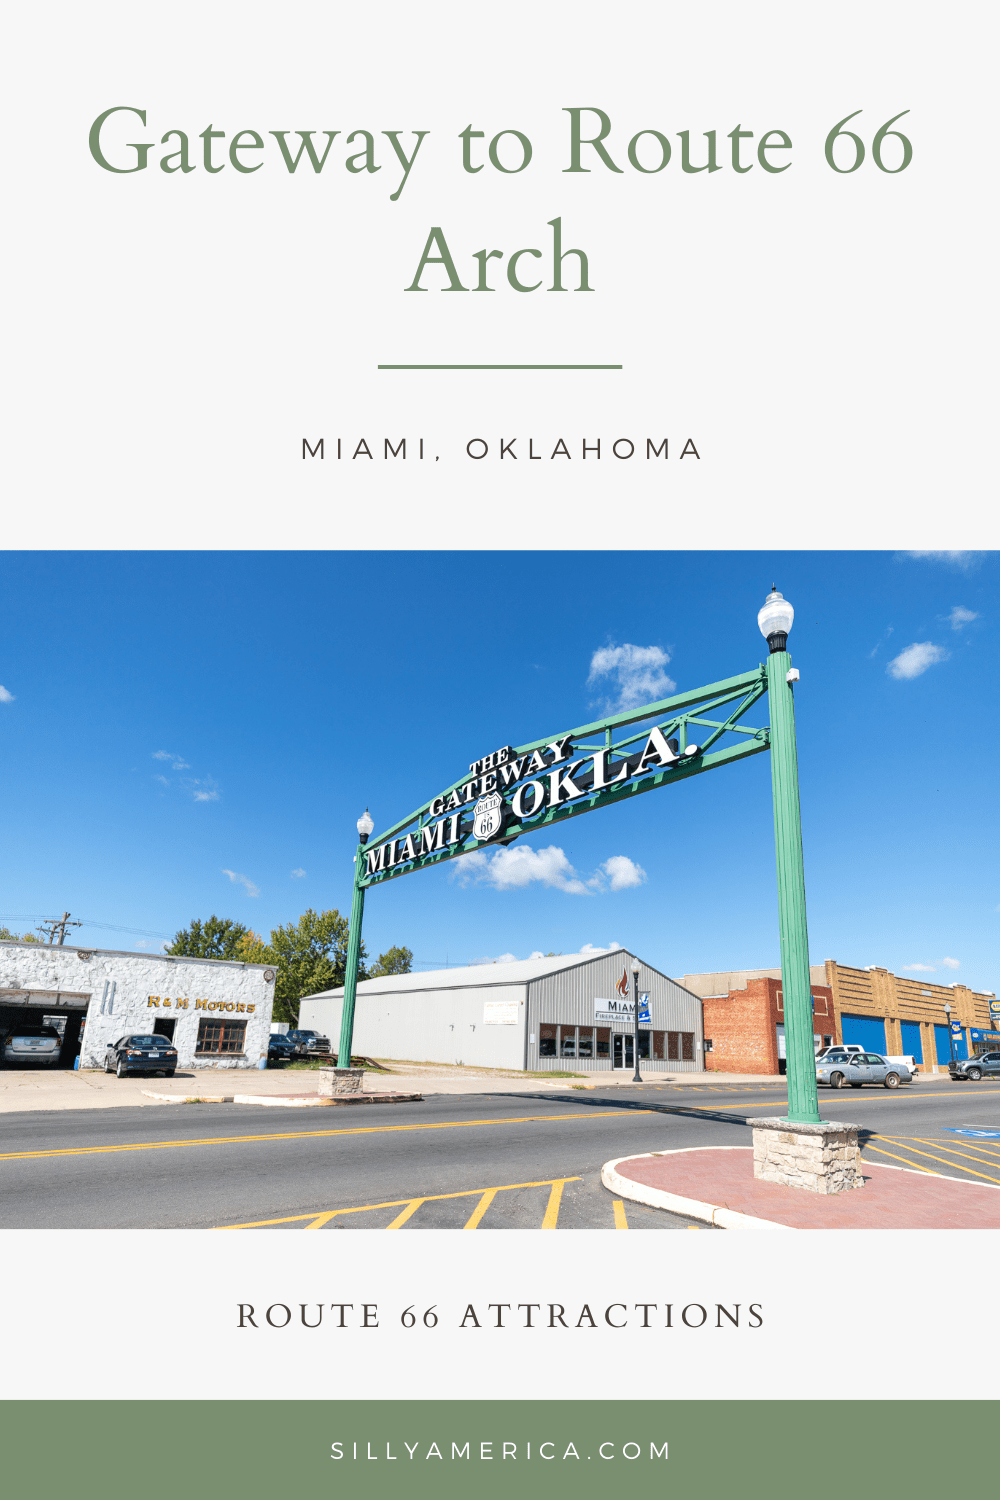 No road trip across Route 66 is complete without a stop in Miami. Miami, Oklahoma that is. Miami (pronounced "My-am-uh") is known as the Gateway to Route 66, and there is an arch to prove it.  #RoadTrips #RoadTripStop #Route66 #Route66RoadTrip #OklahomaRoute66 #Oklahoma #OklahomaRoadTrip #OklahomaRoadsideAttractions #RoadsideAttractions #RoadsideAttraction #RoadsideAmerica #RoadTrip